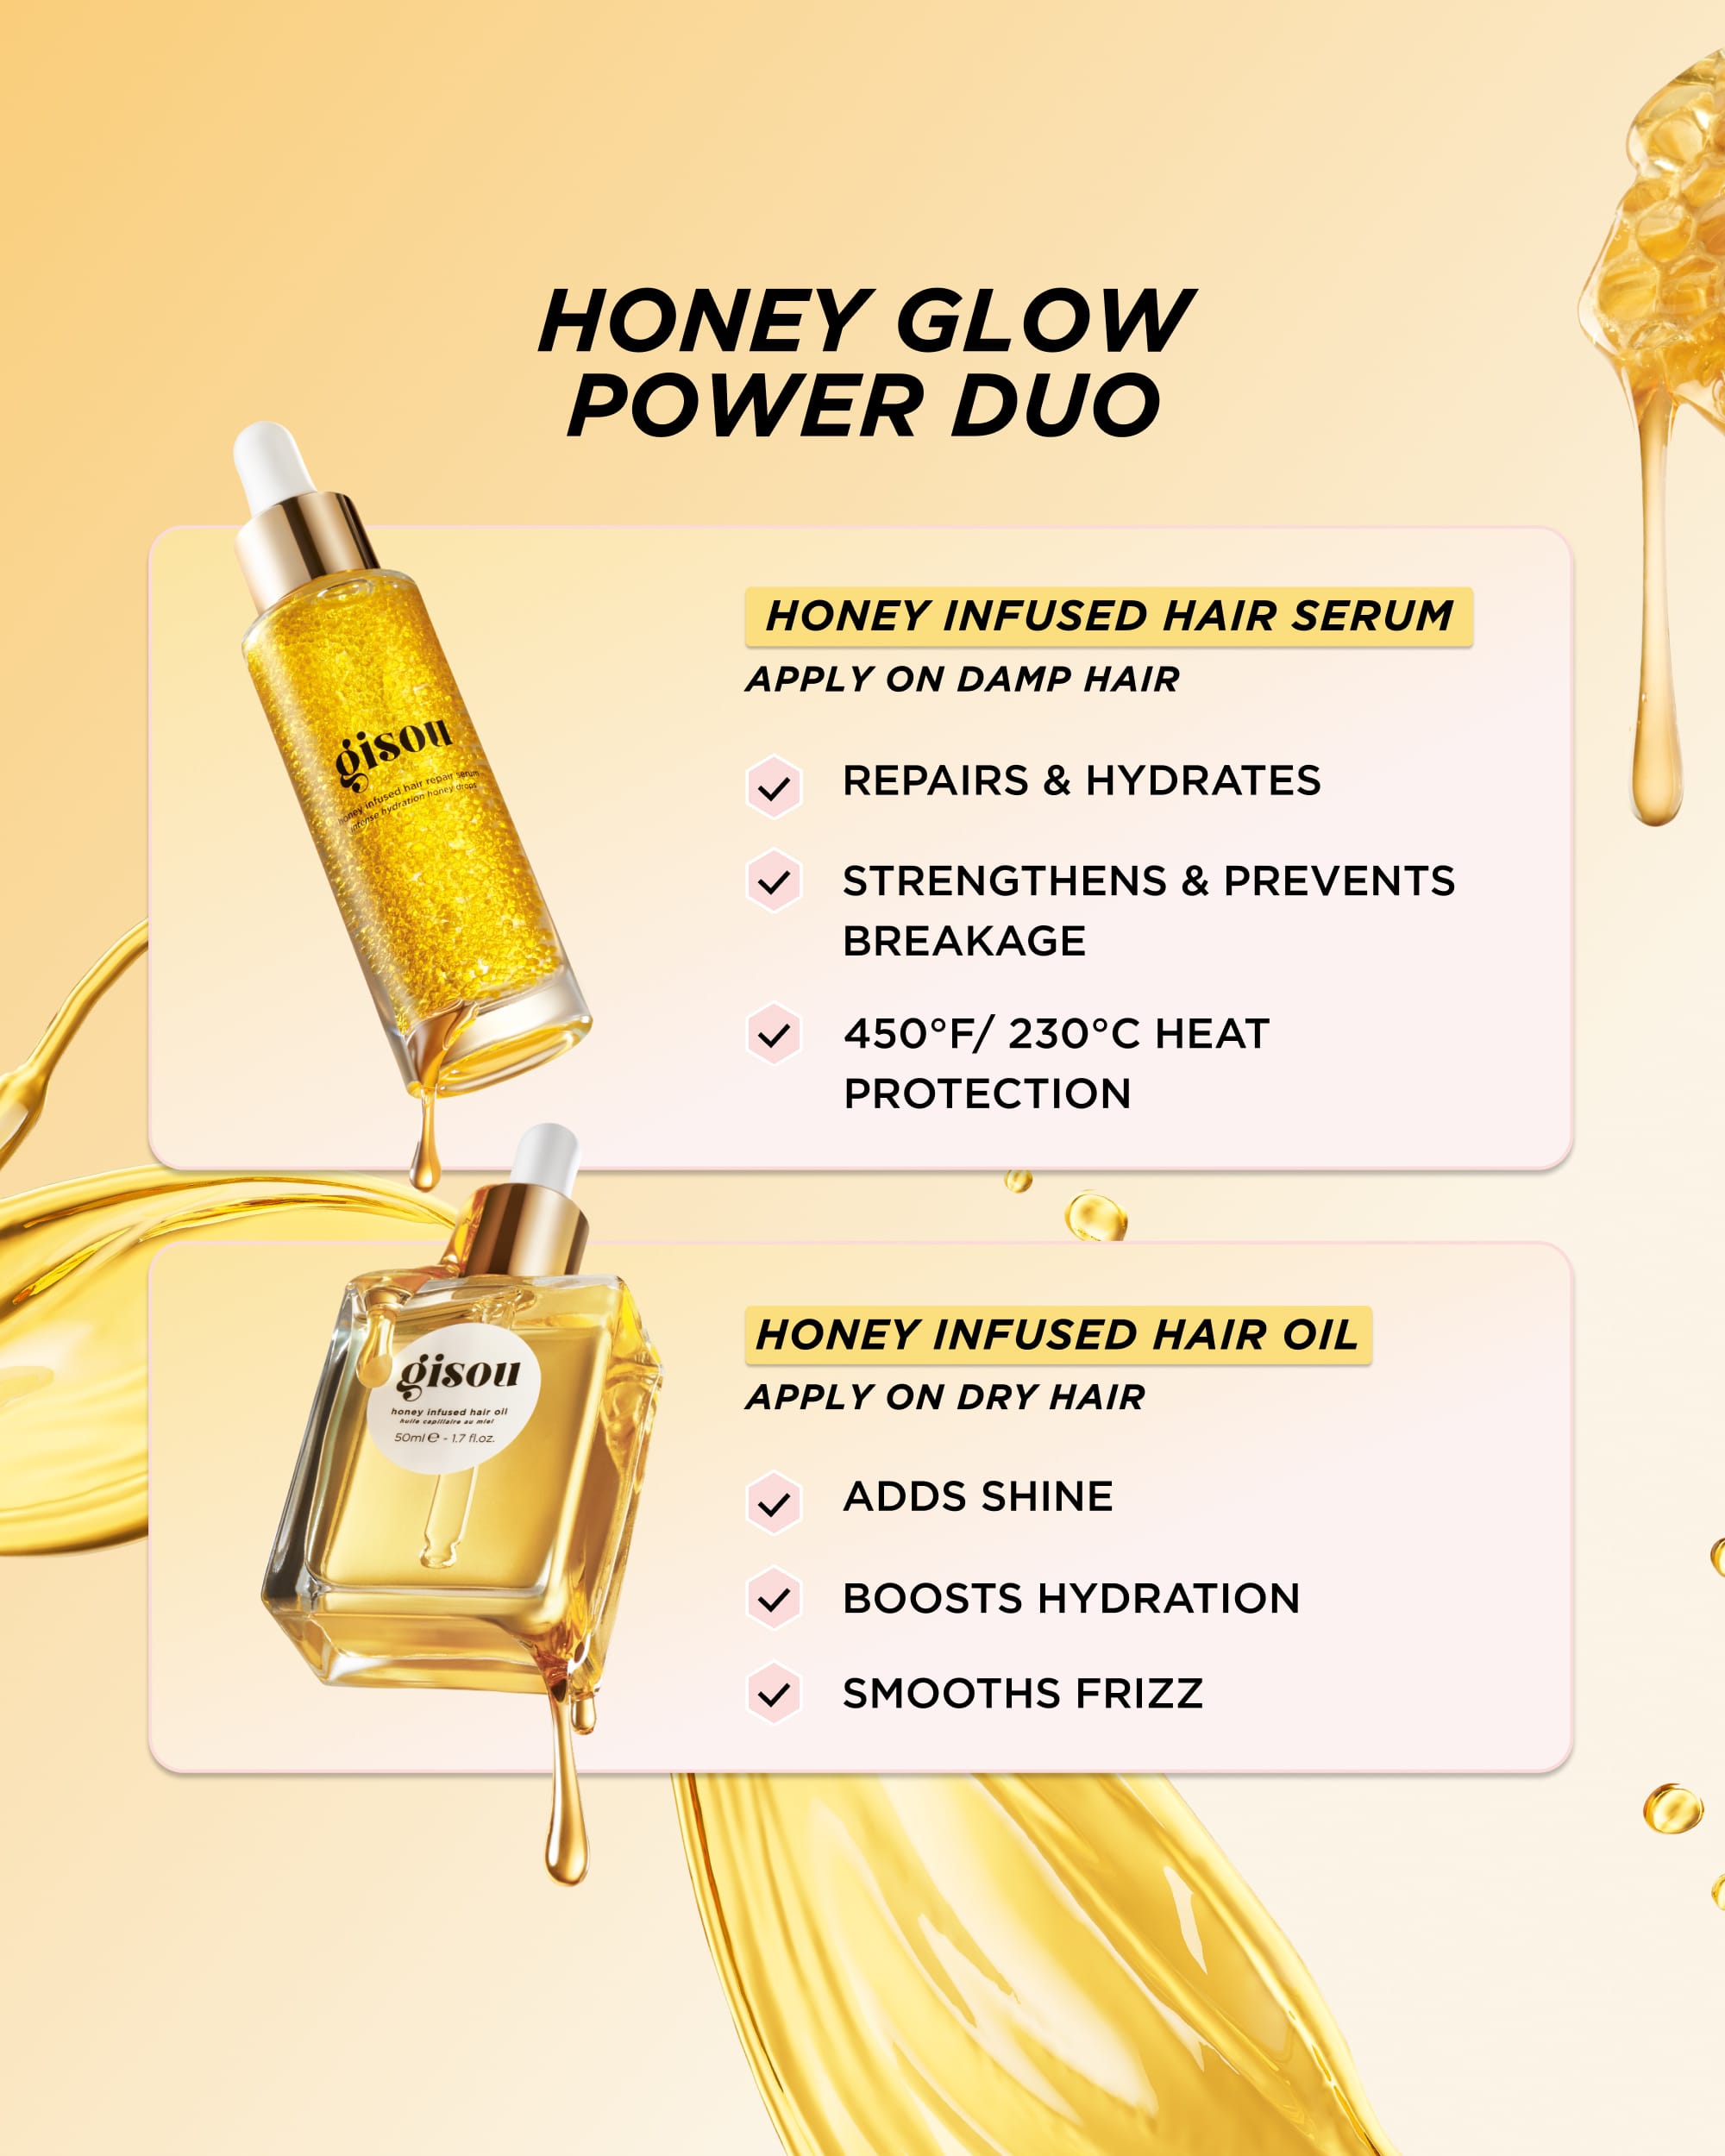  Gisou Honey Infused Hair Oil Travel Size Enriched with  Mirsalehi Honey to Deeply Nourish & Moisturize Hair (1.7 fl oz) : Beauty &  Personal Care